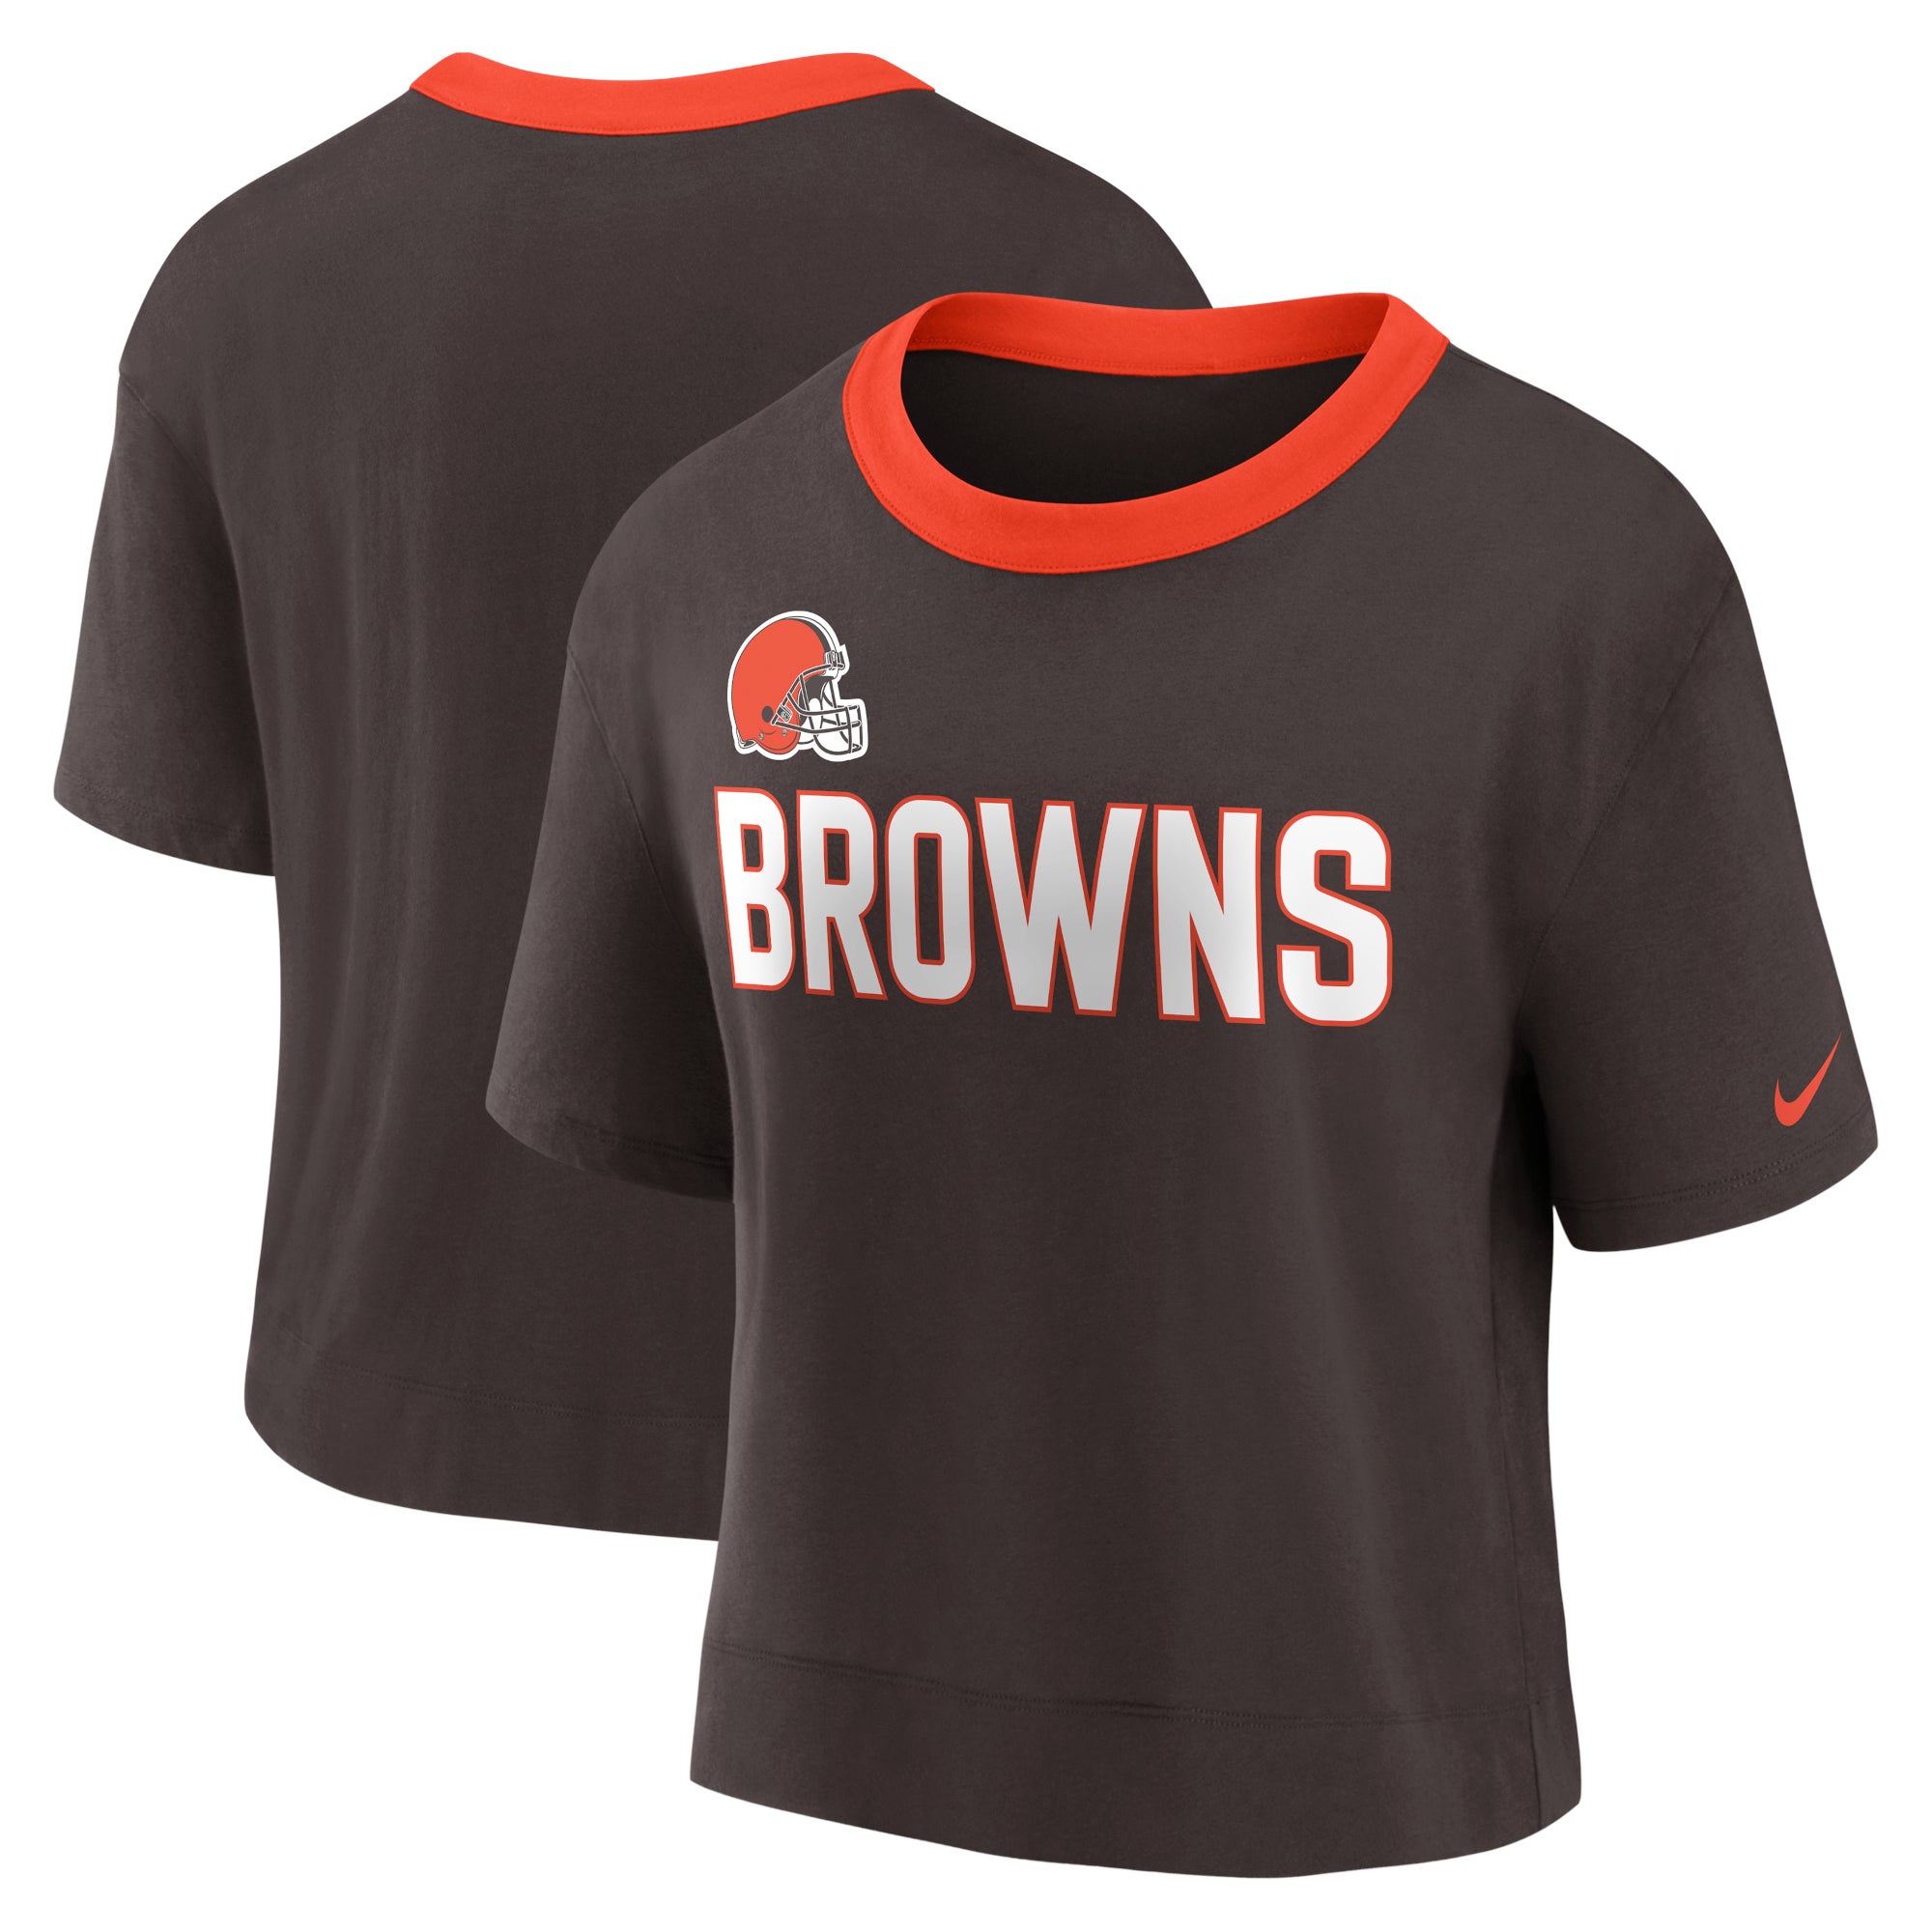 Nike Browns Muscle T-Shirt Men's Green Tree Mall